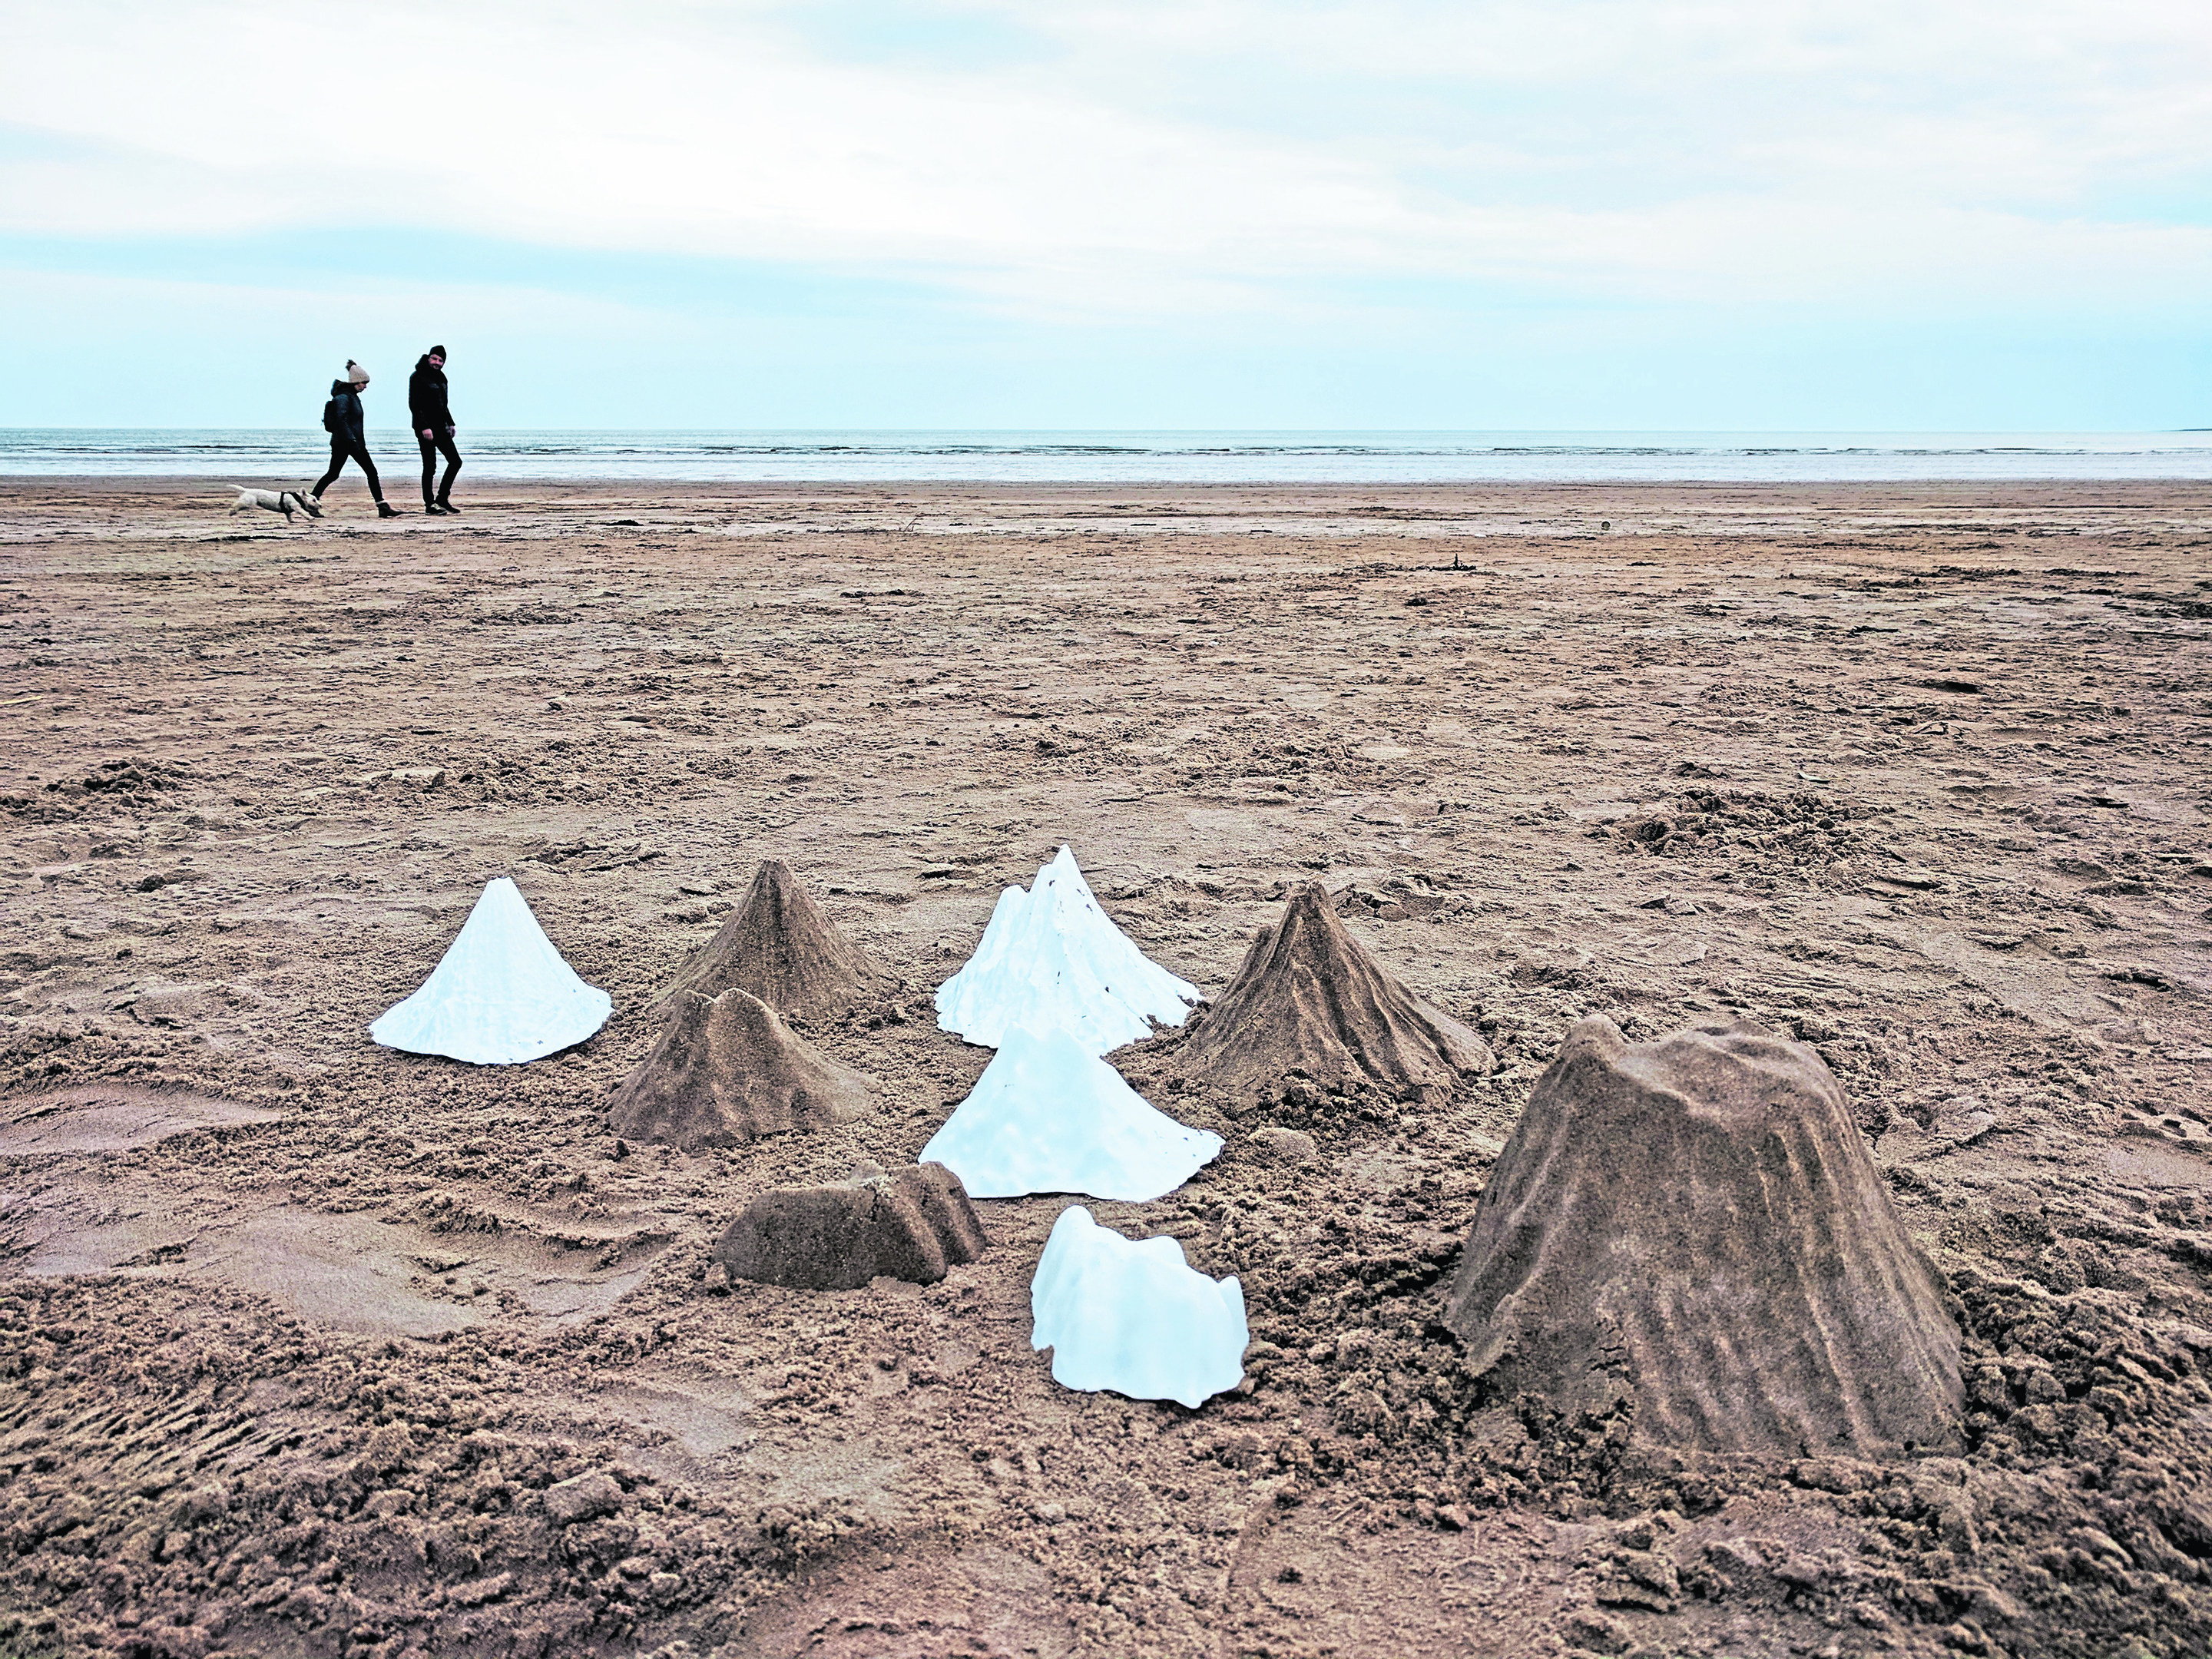 Artist Katie Paterson wants people to sculpt thousands of mountains of sand on north coastlines.